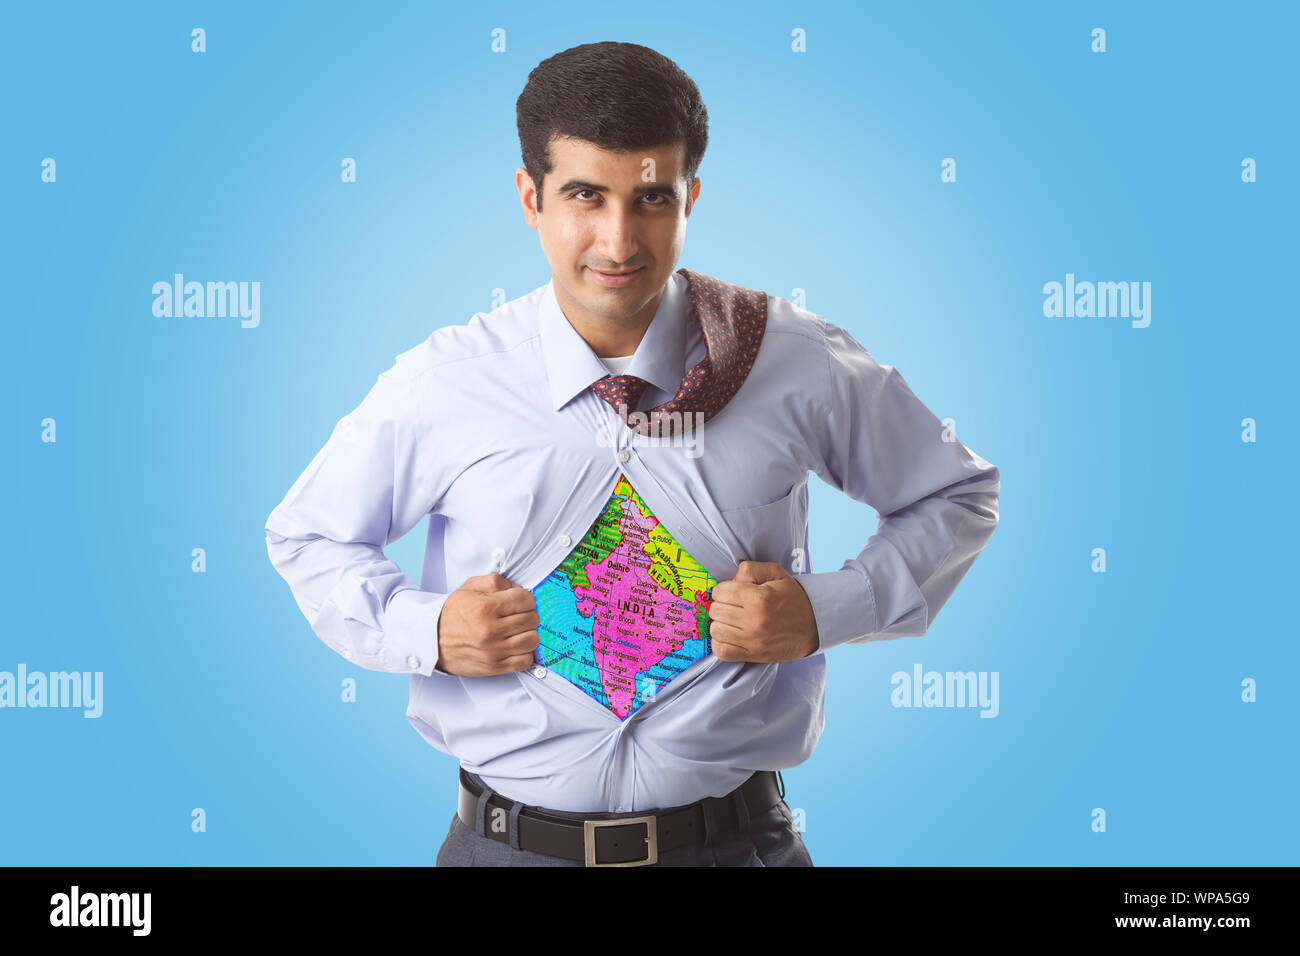 Super businessman tearing up his shirt to reveal Indian map on chest Stock Photo